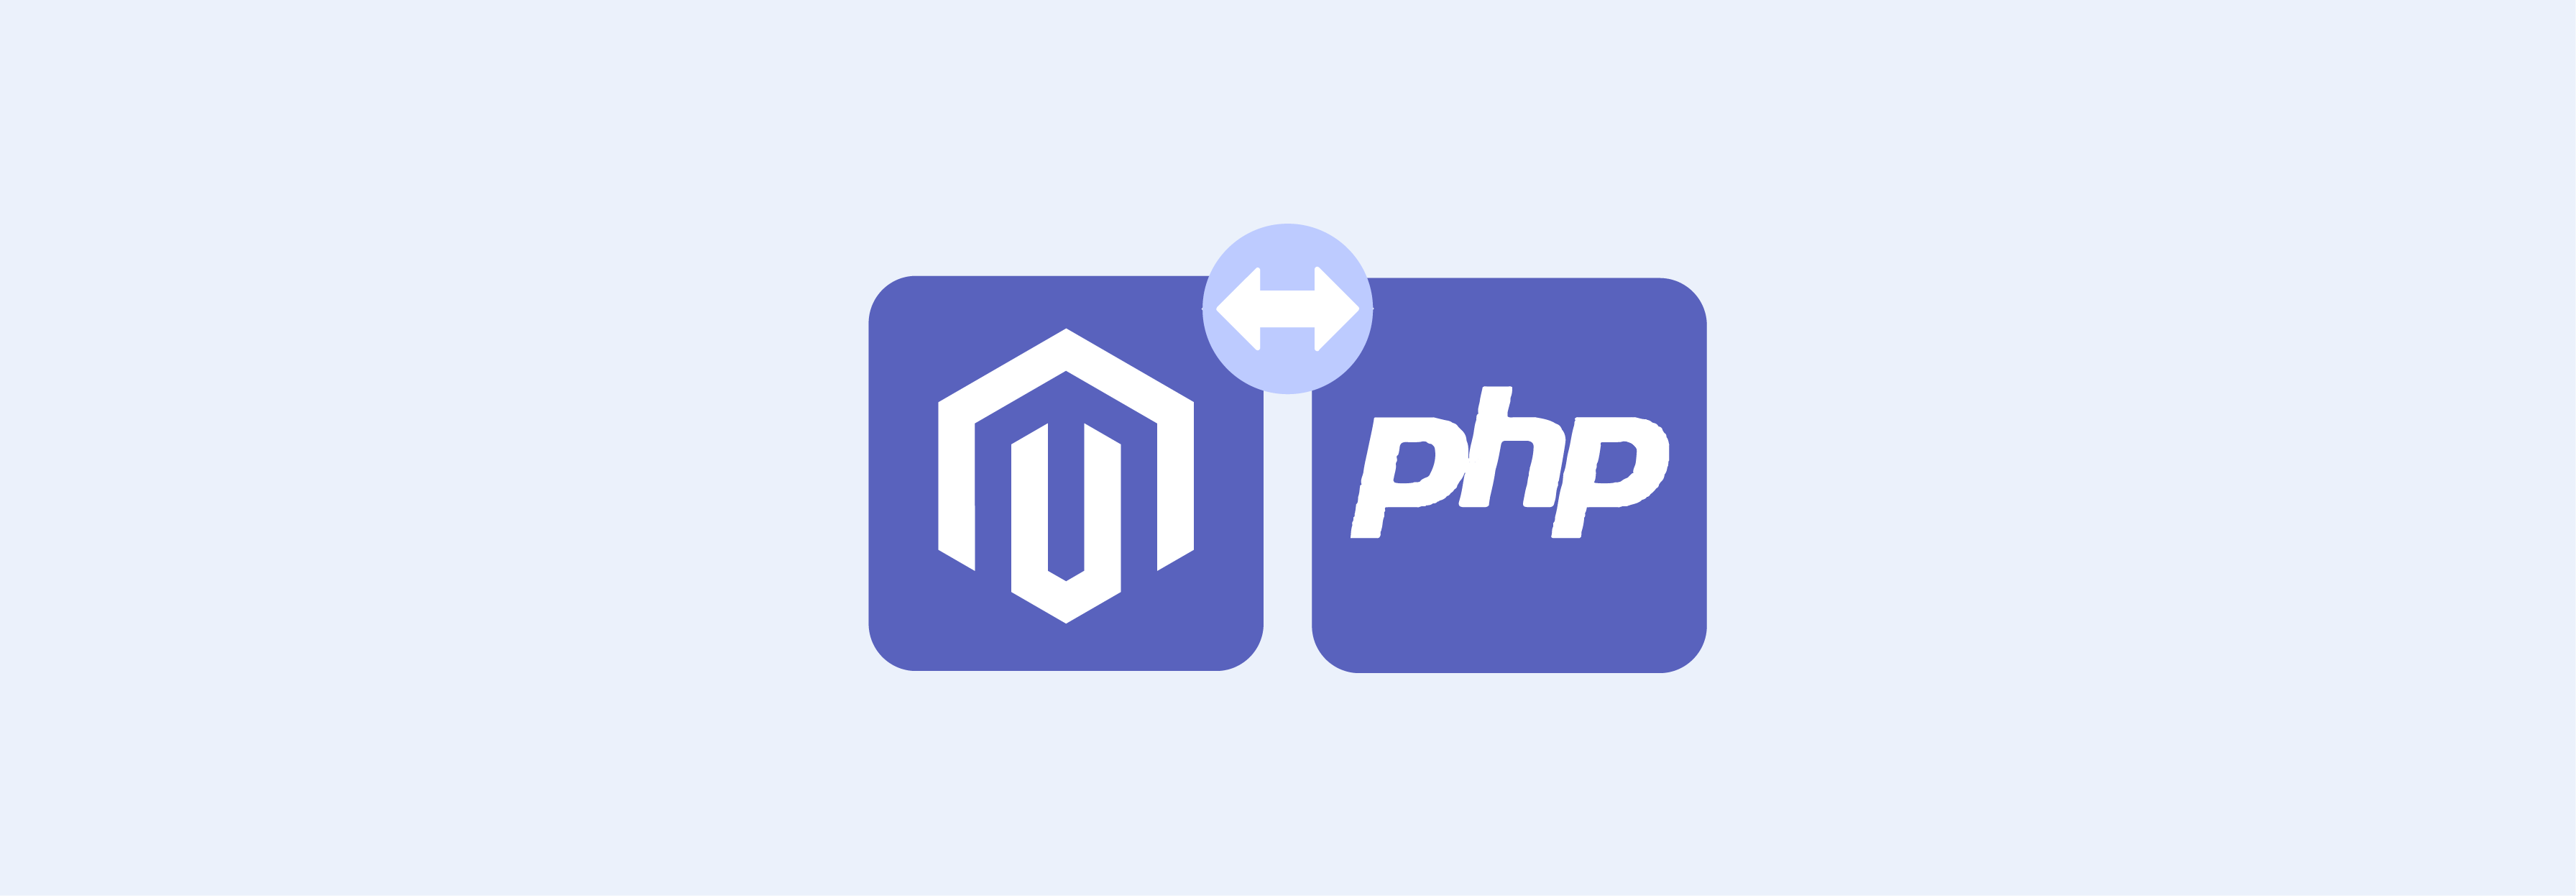 PHP and Magento Compatibility of Top Magento Hosting Providers